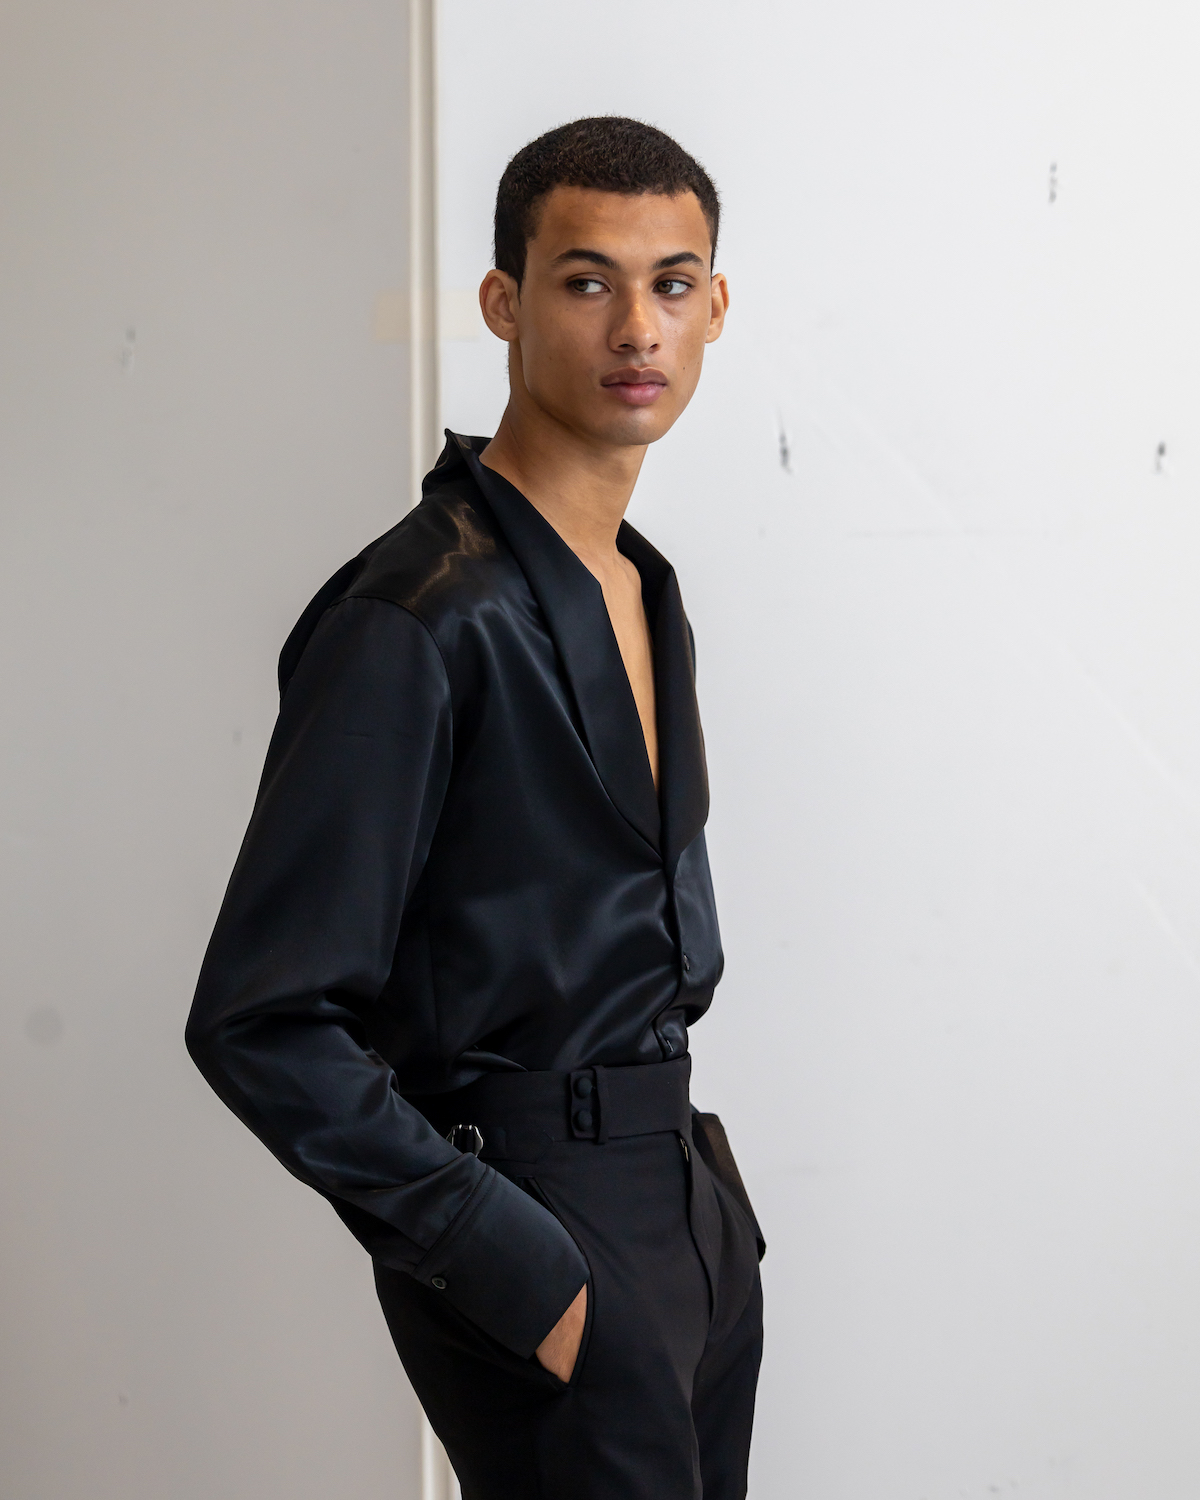 A model wearing a black suit leans against a wall. The model is wearing clothes from B.M.C.